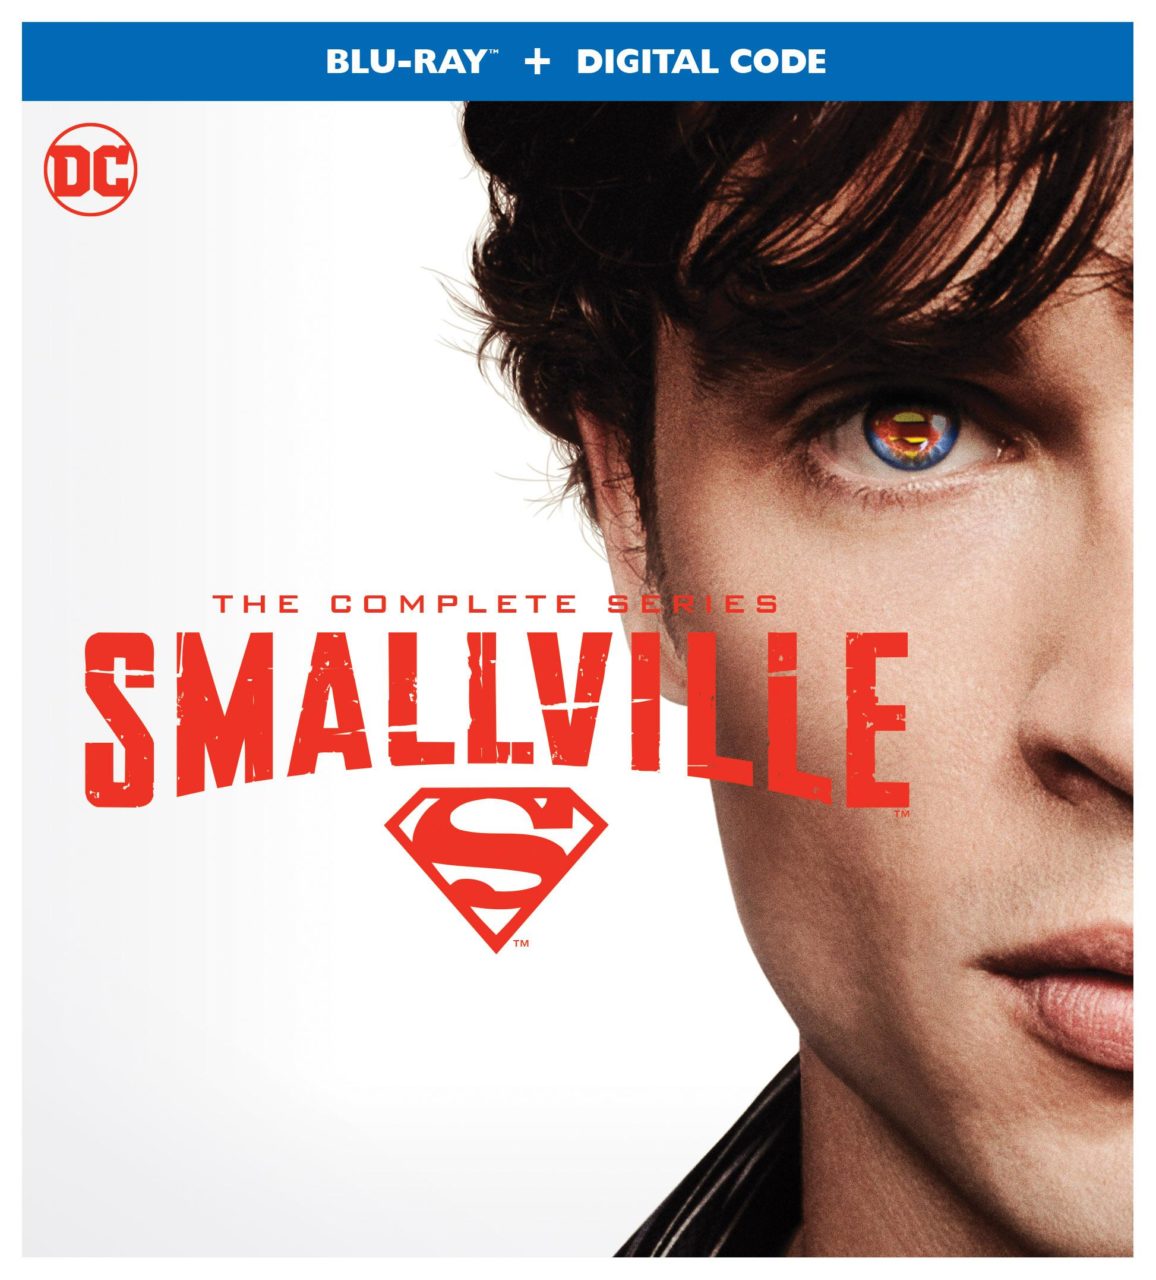 Smallville: The Complete Series 20th Anniversary Edition Blu-Ray Combo Pack cover (Warner Bros. Home Entertainment)